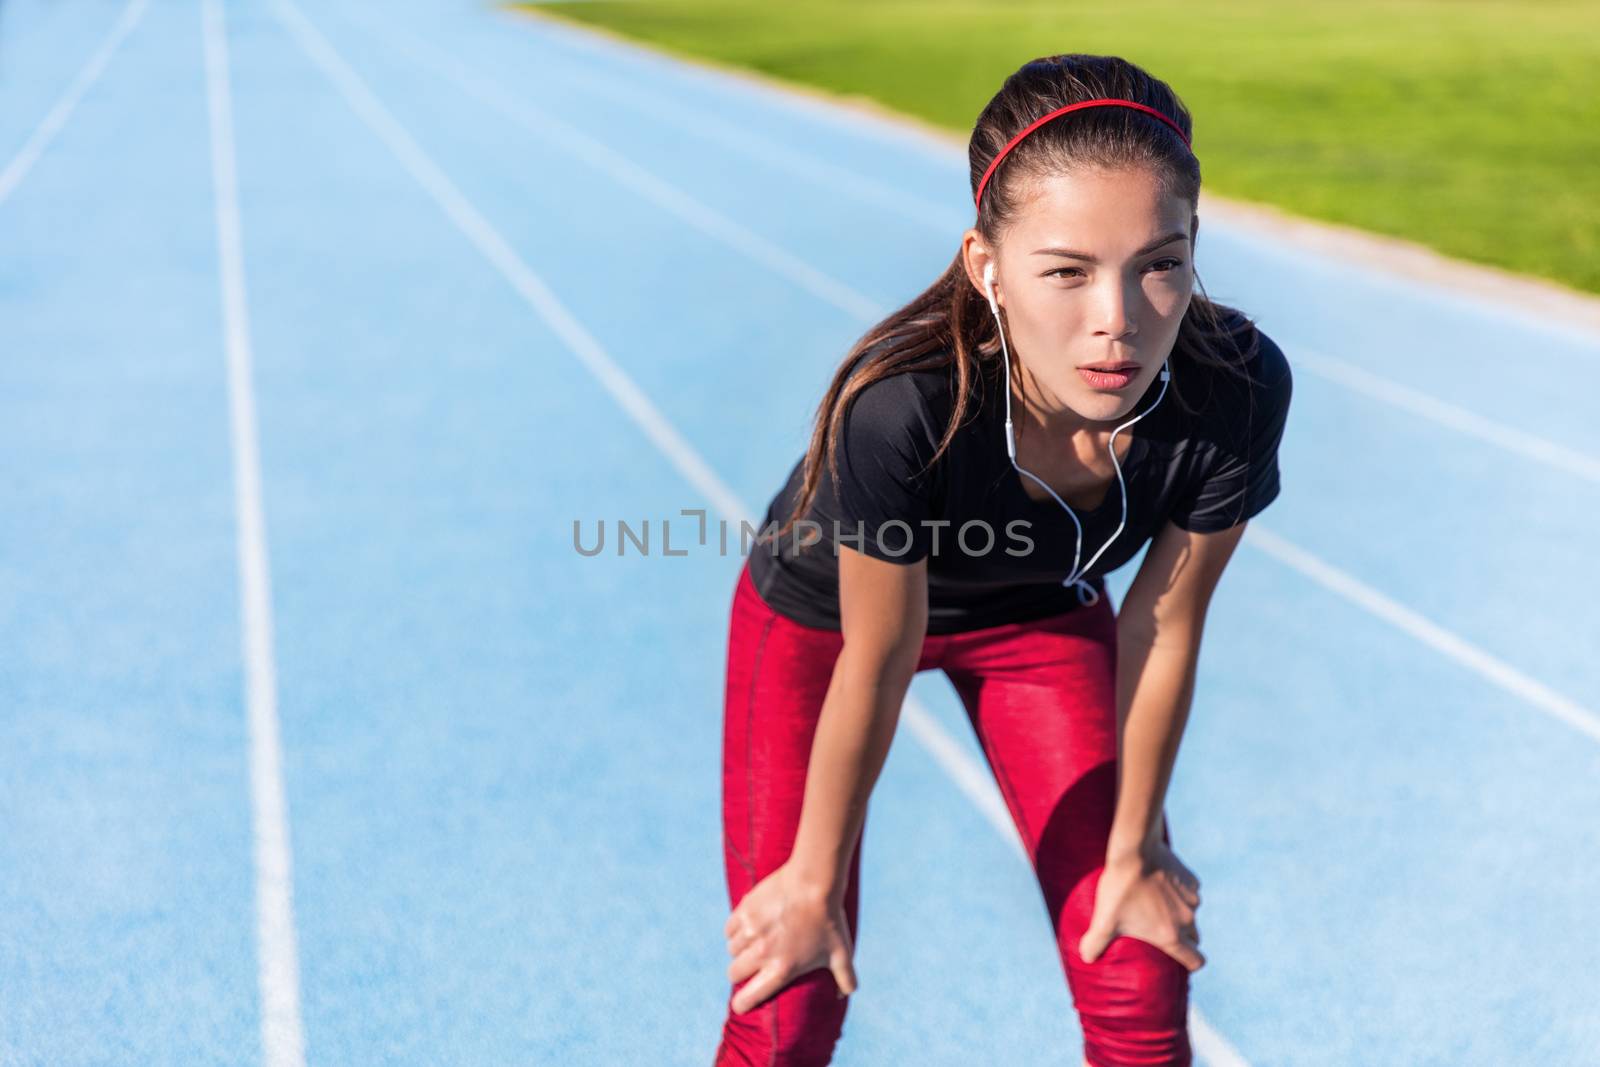 Runner resting on outdoor running track tired taking a break getting determination and motivation ready for the challenge. Athlete woman listening to music with earphones for focus.